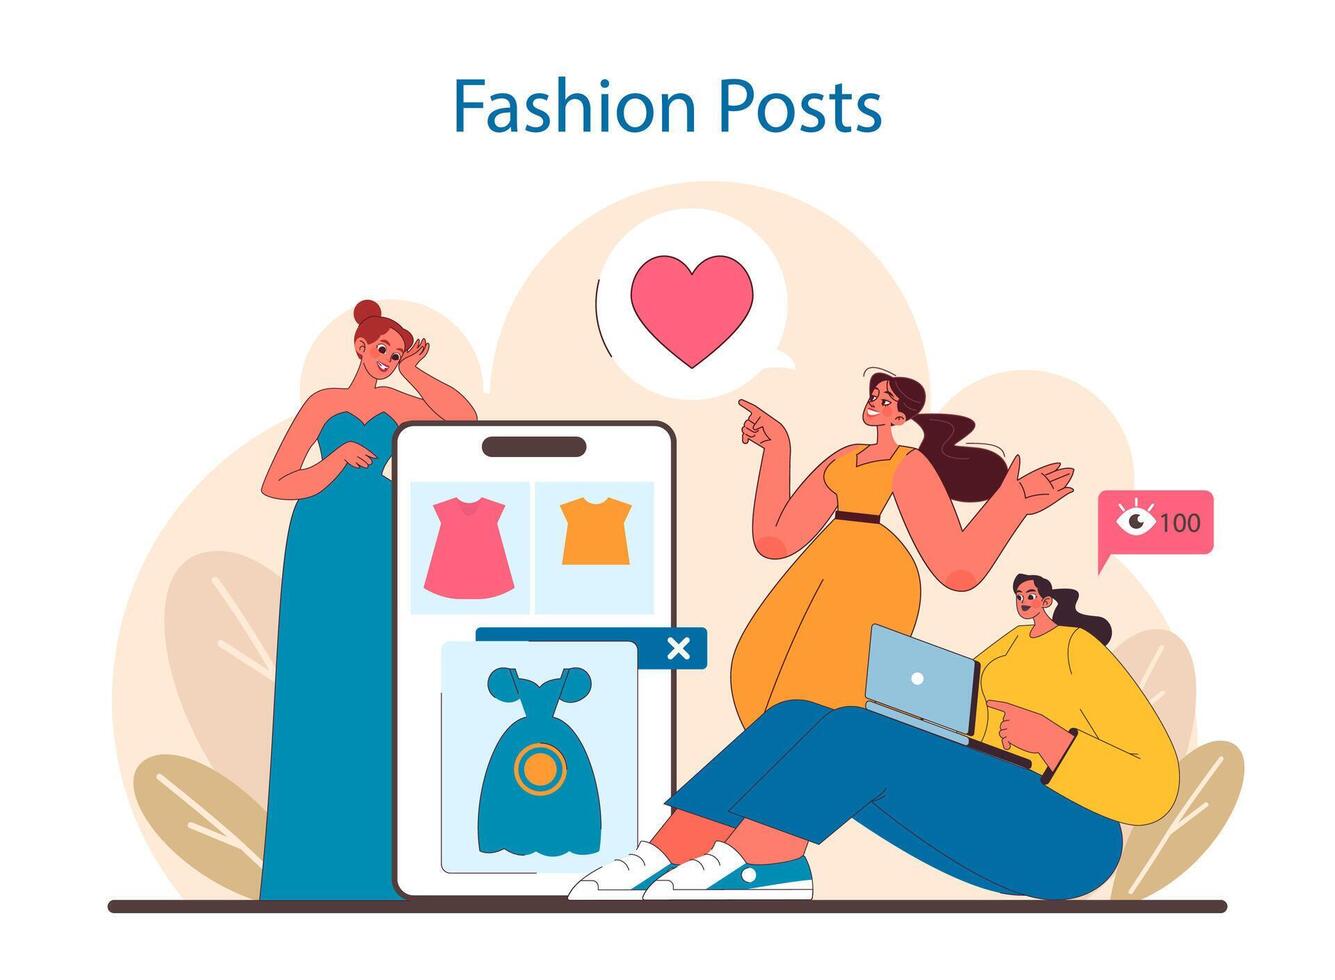 Fashion Posts theme. Trendsetters influencing style through social media. vector